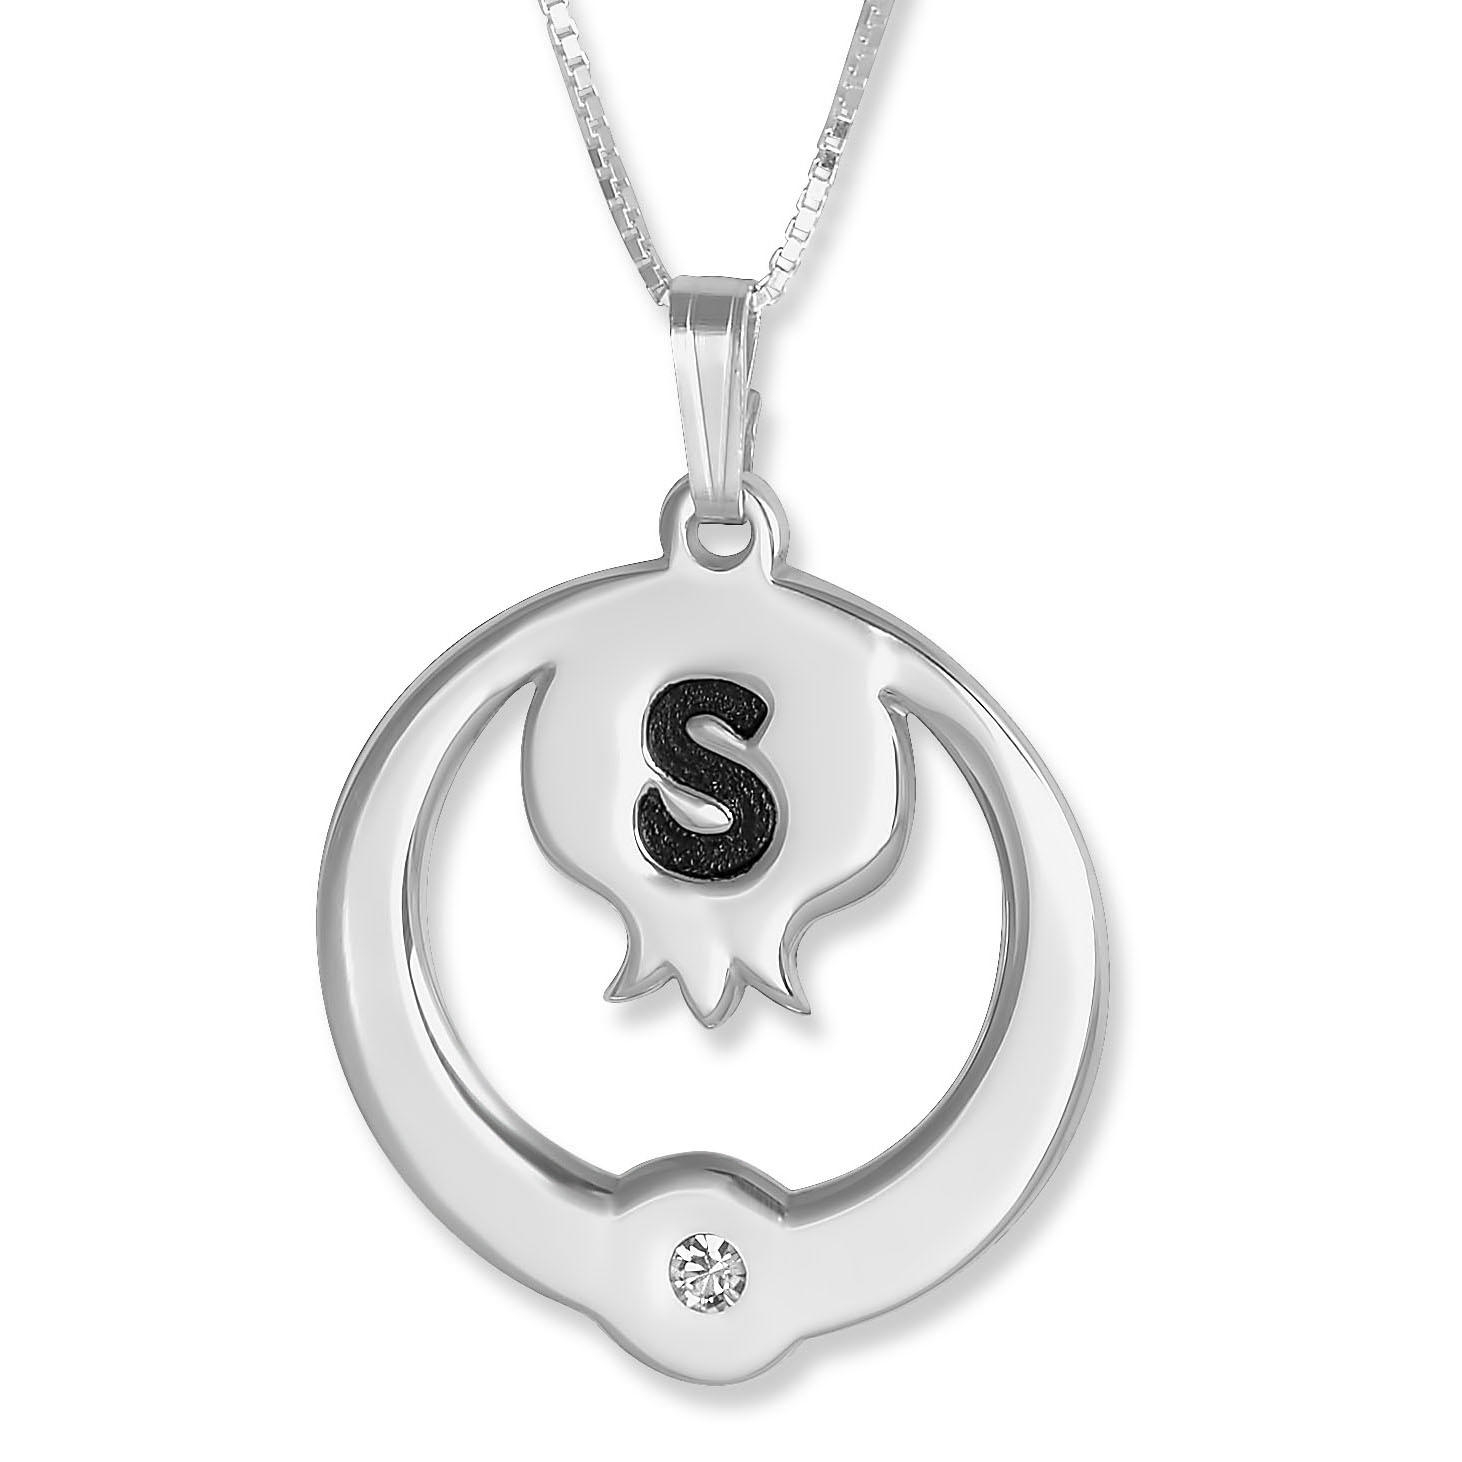 Silver Initial Pendant with Birthstone, Pomegranate - 1